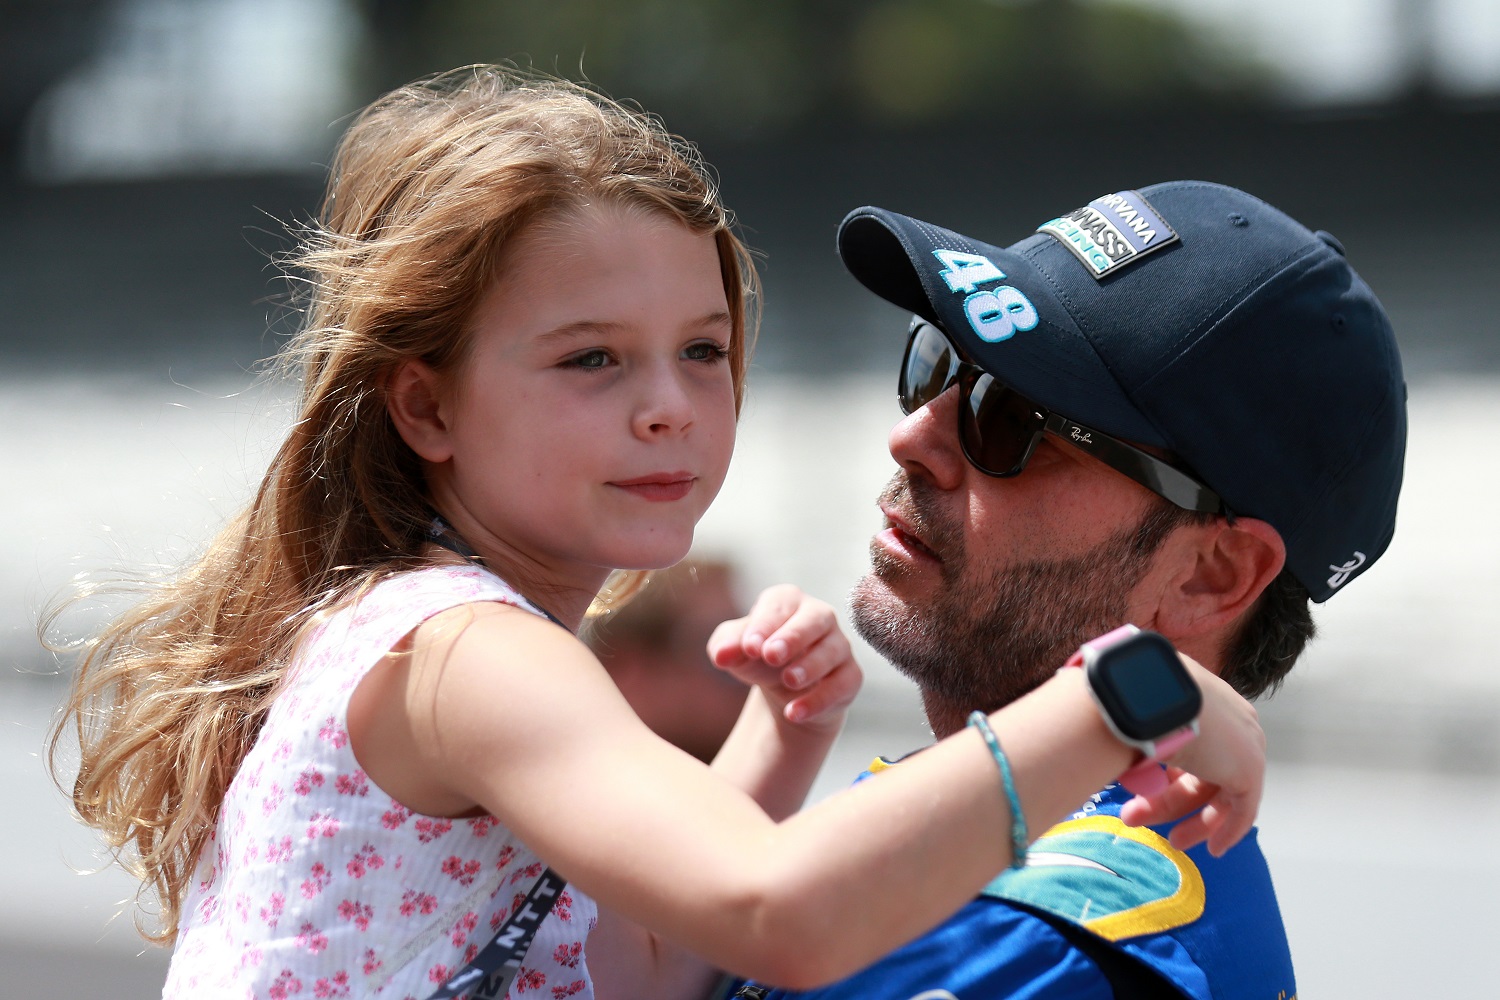 Jimmie Johnson, driver of the No. 48 Carvana Chip Ganassi Racing Honda, holds daughter Lydia on the grid prior to the NTT IndyCar Series Big Machine Spiked Coolers Grand Prix at Indianapolis Motor Speedway on Aug. 14, 2021.